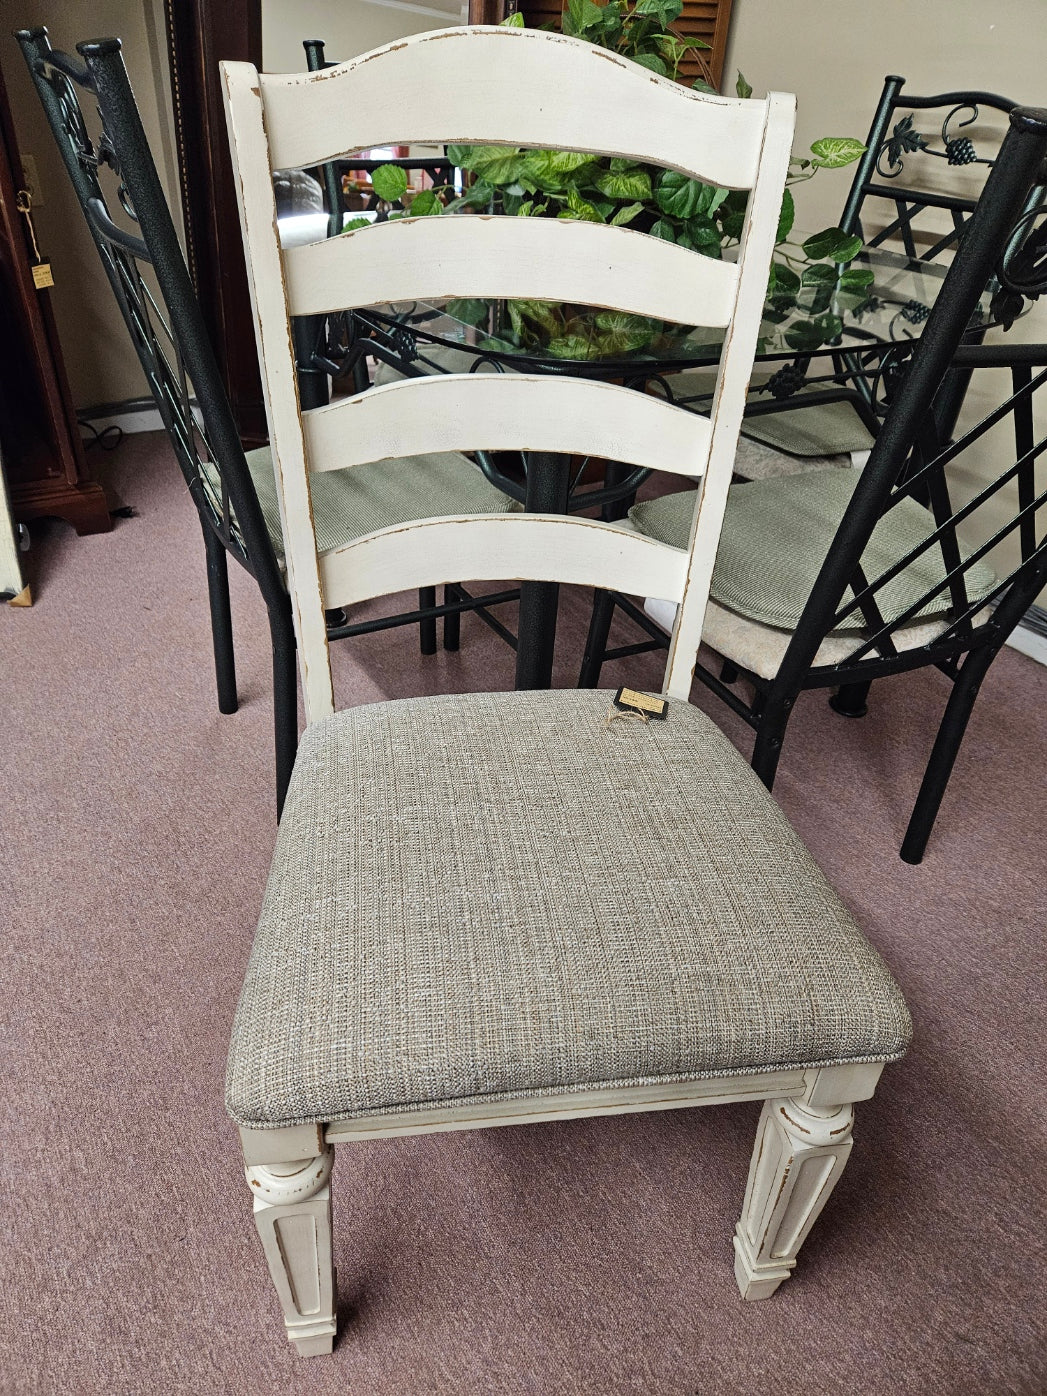 Single White Painted Chair